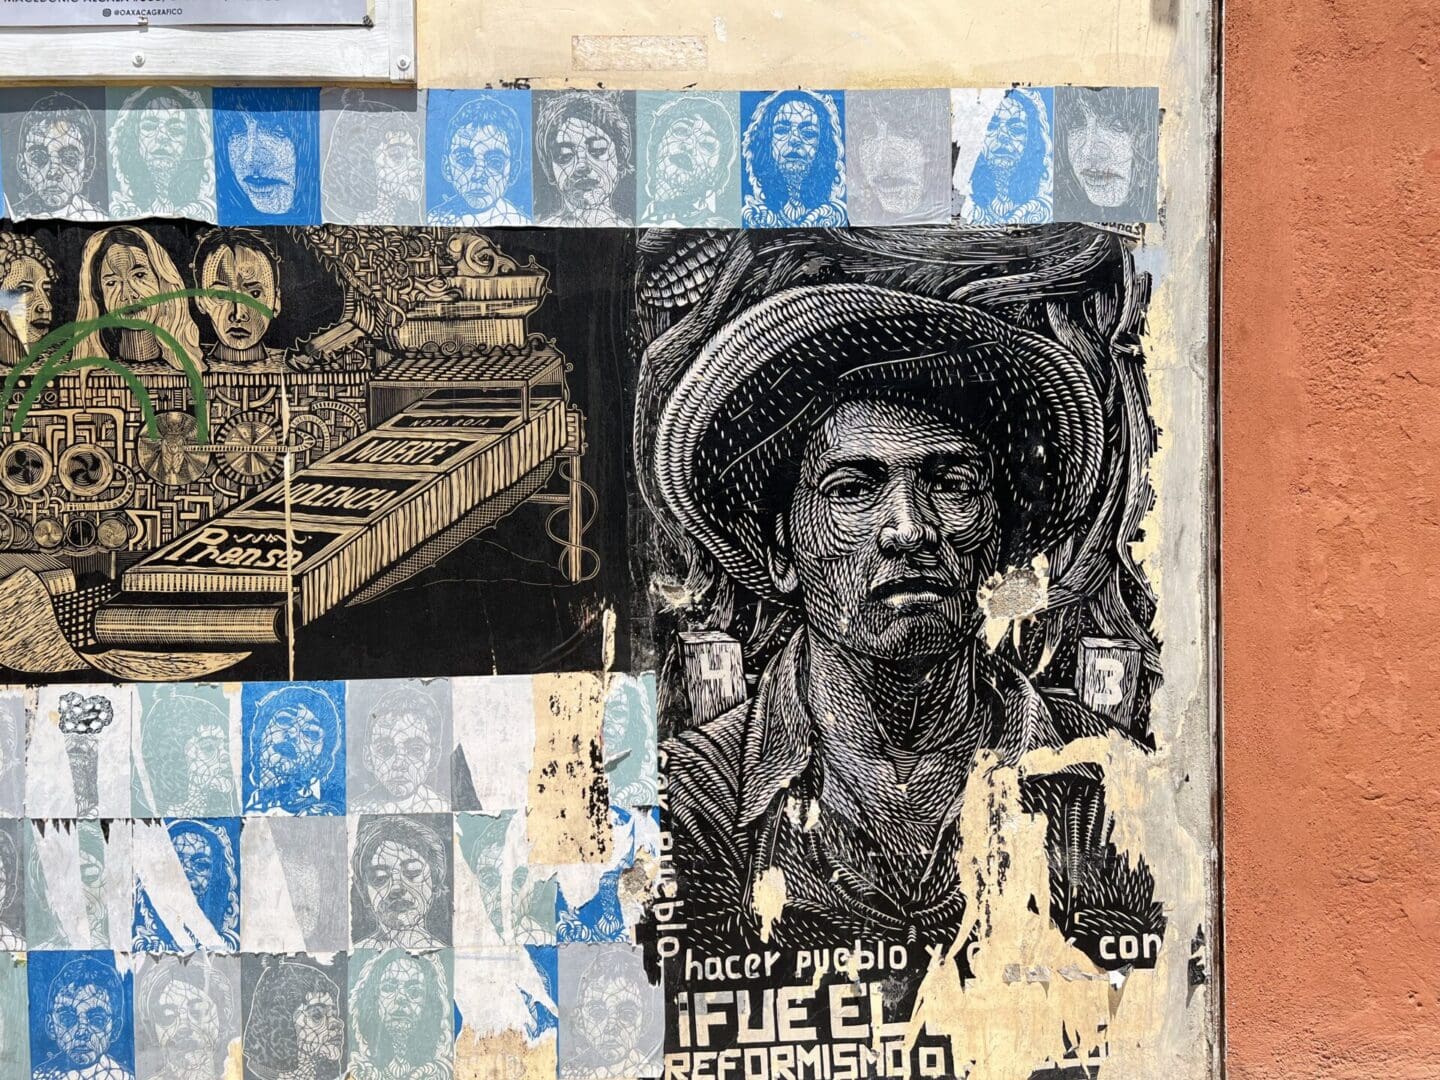 A mural on the side of a building with a man in a hat.